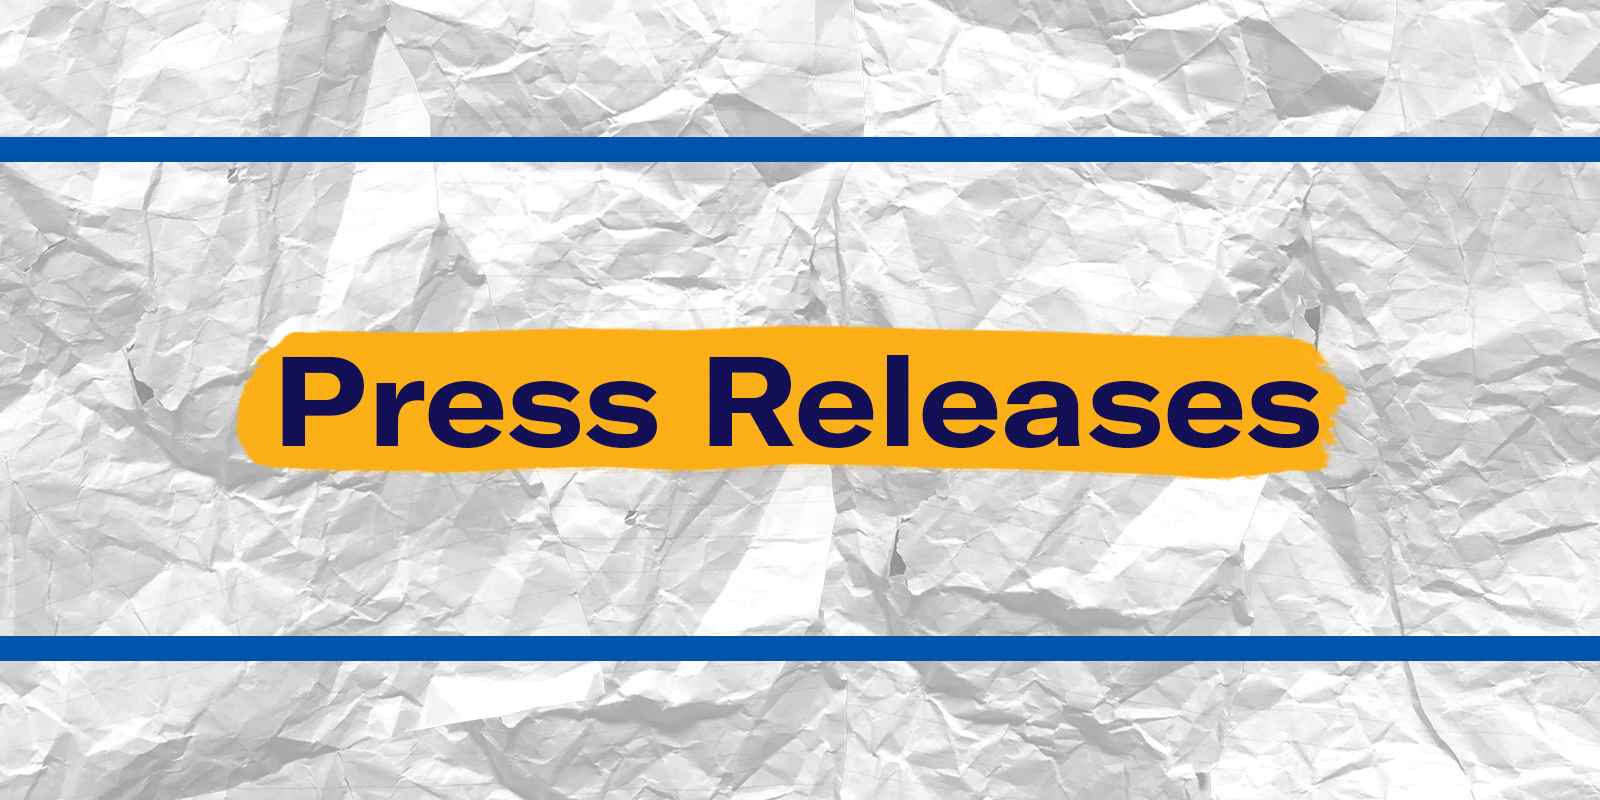 The words 'Press Releases' in navy font, with small blue rectangles above and below, on a background of crumpled and wrinkled notebook paper